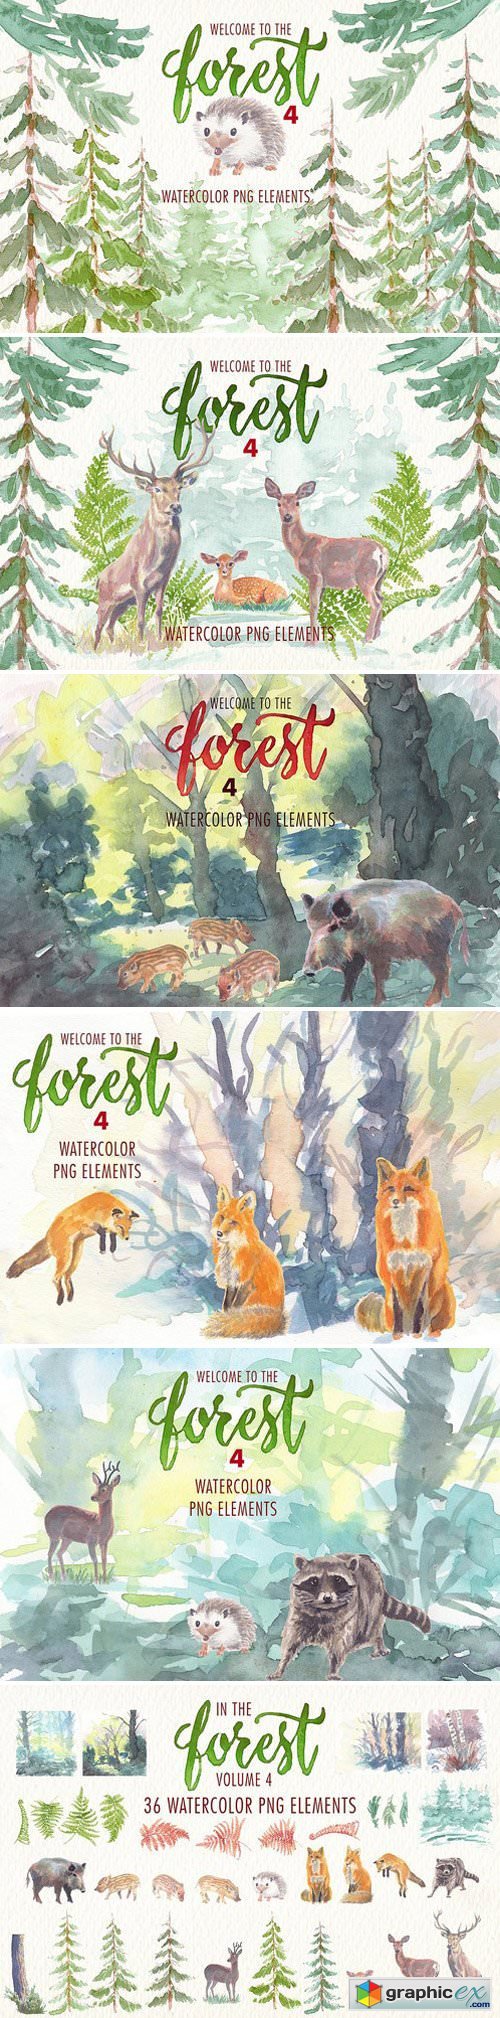 Watercolor in the forest clipart